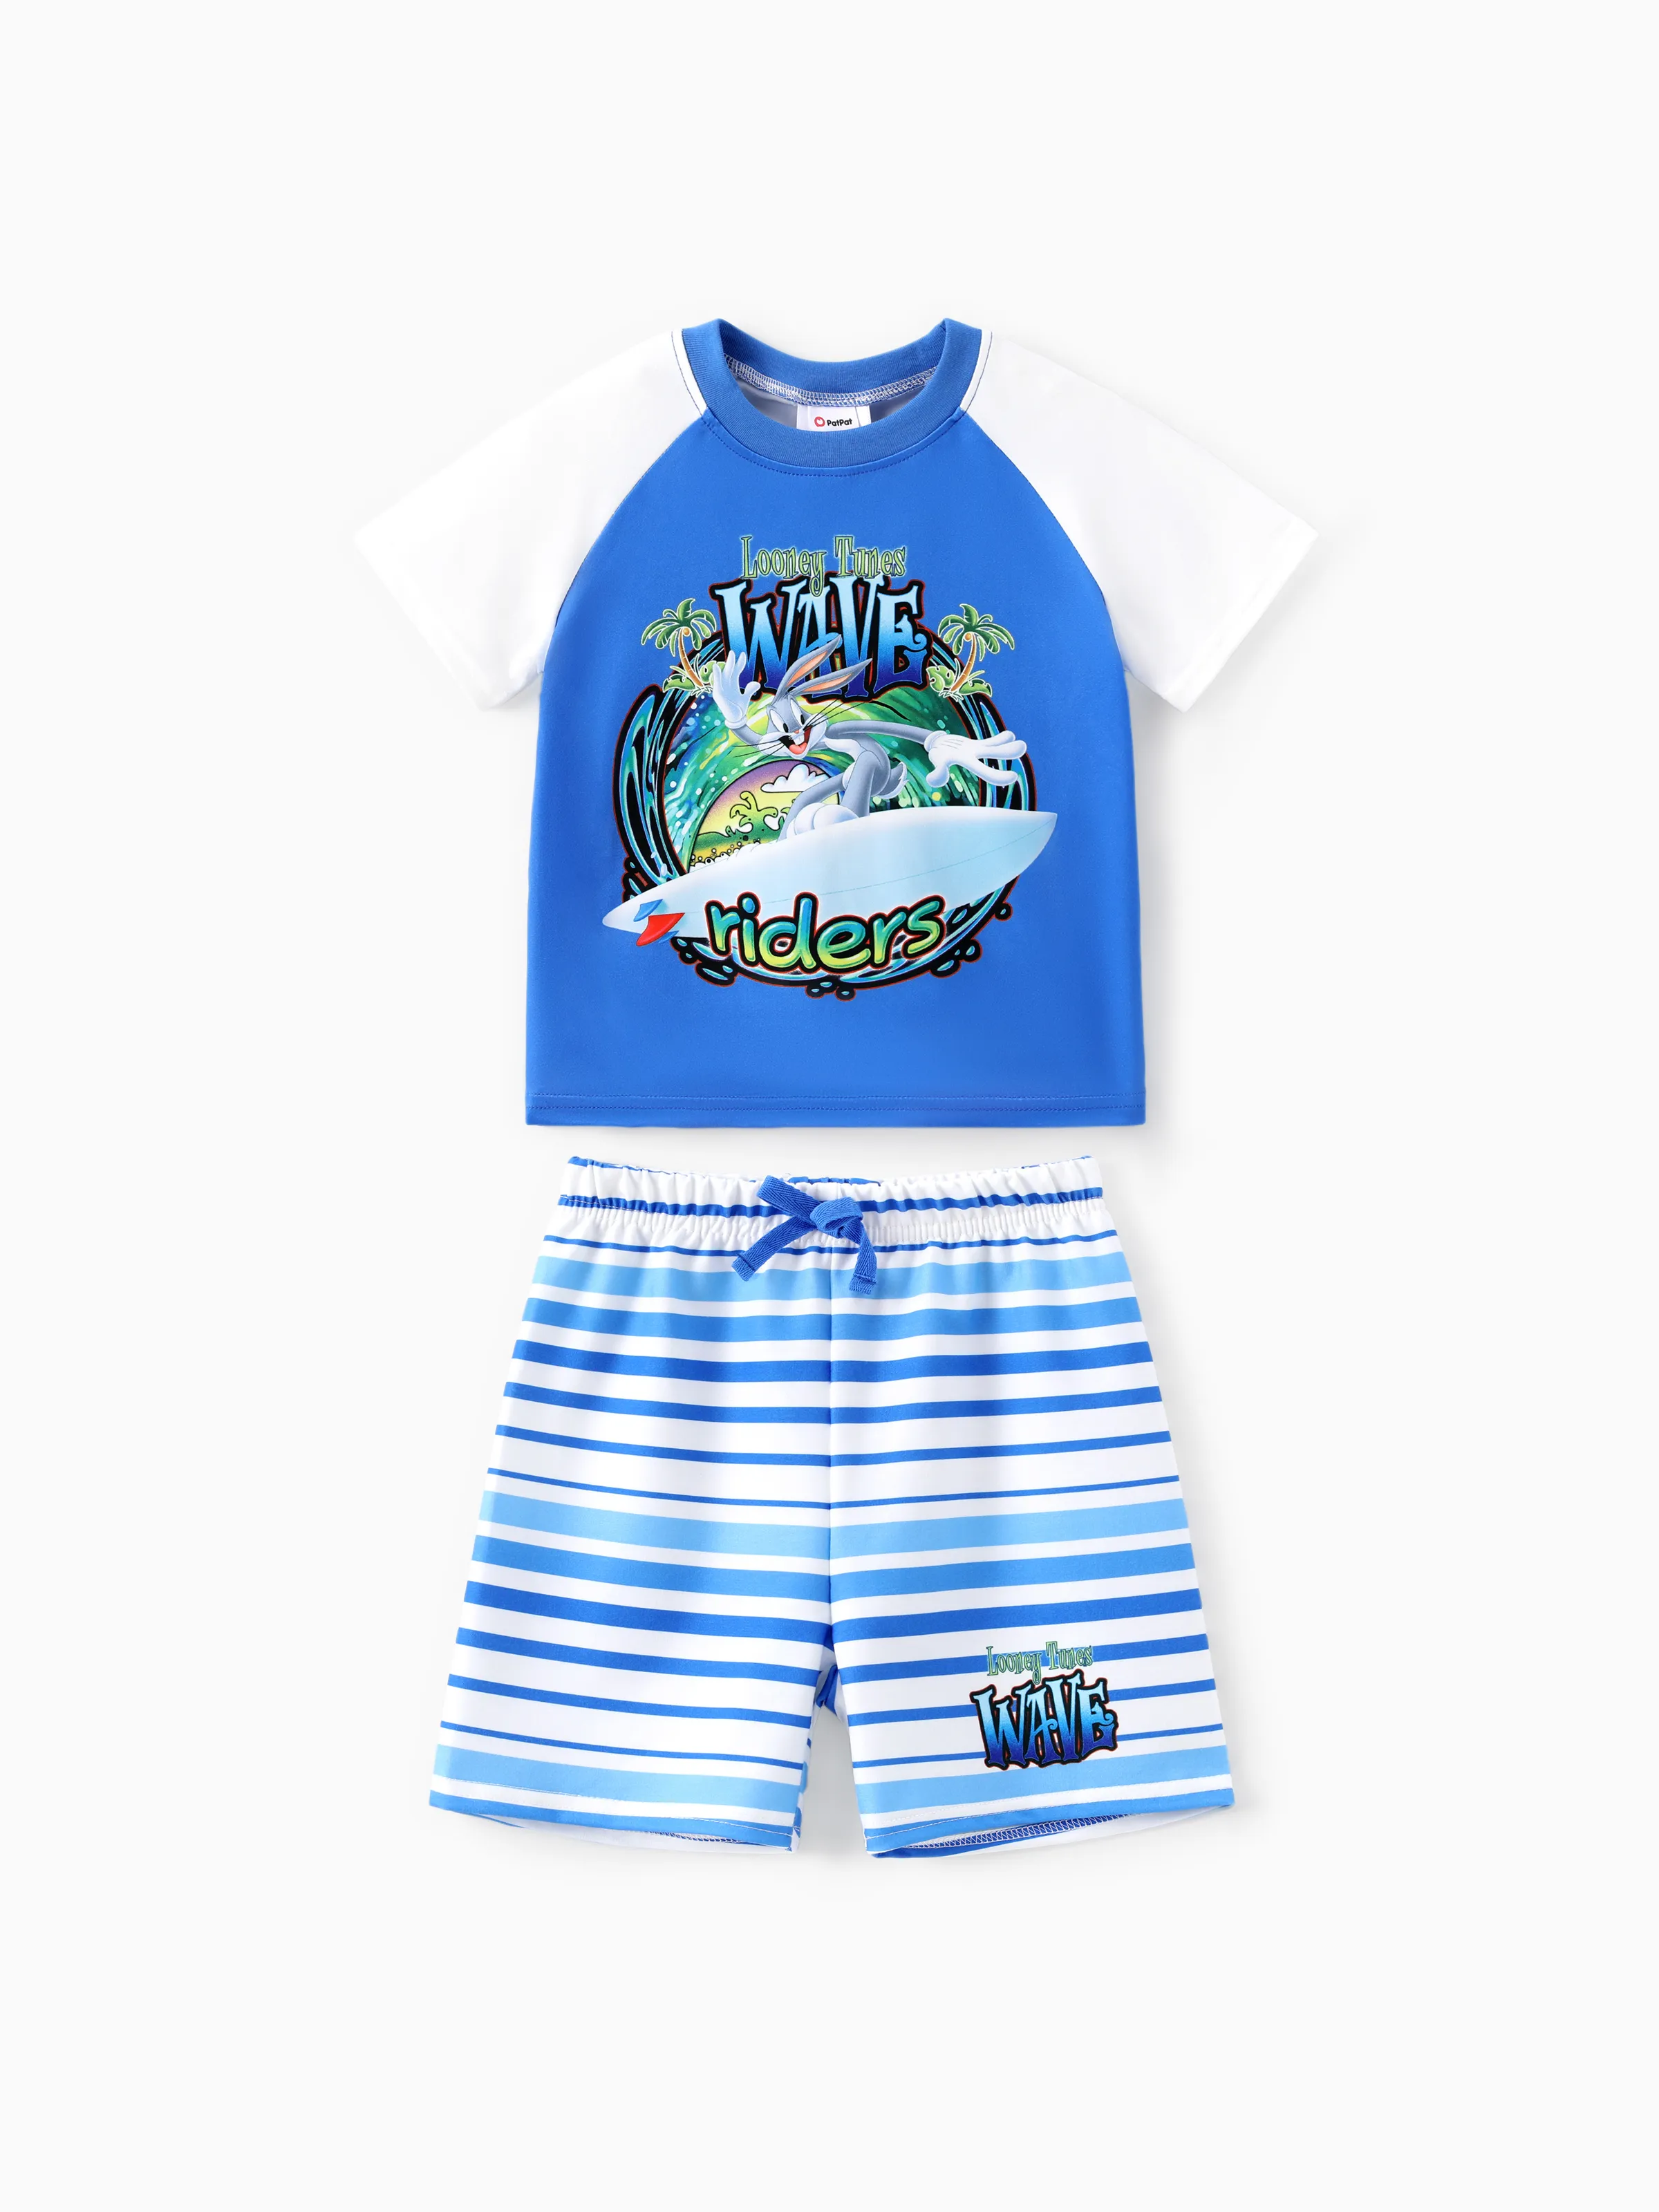 

Looney Tunes Toddler/Kids Boys 2pcs Summer Style Surfing Print Tee with Striped Shorts Set